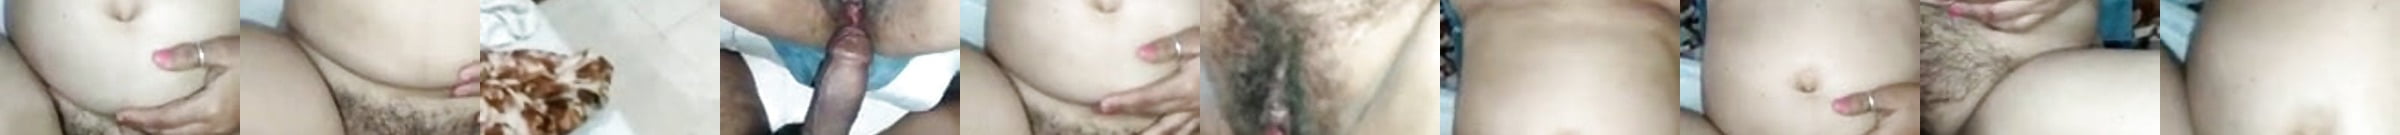 Village Bhabhis Hairy Pussy Fucked After Holi Porn C8 Xhamster 